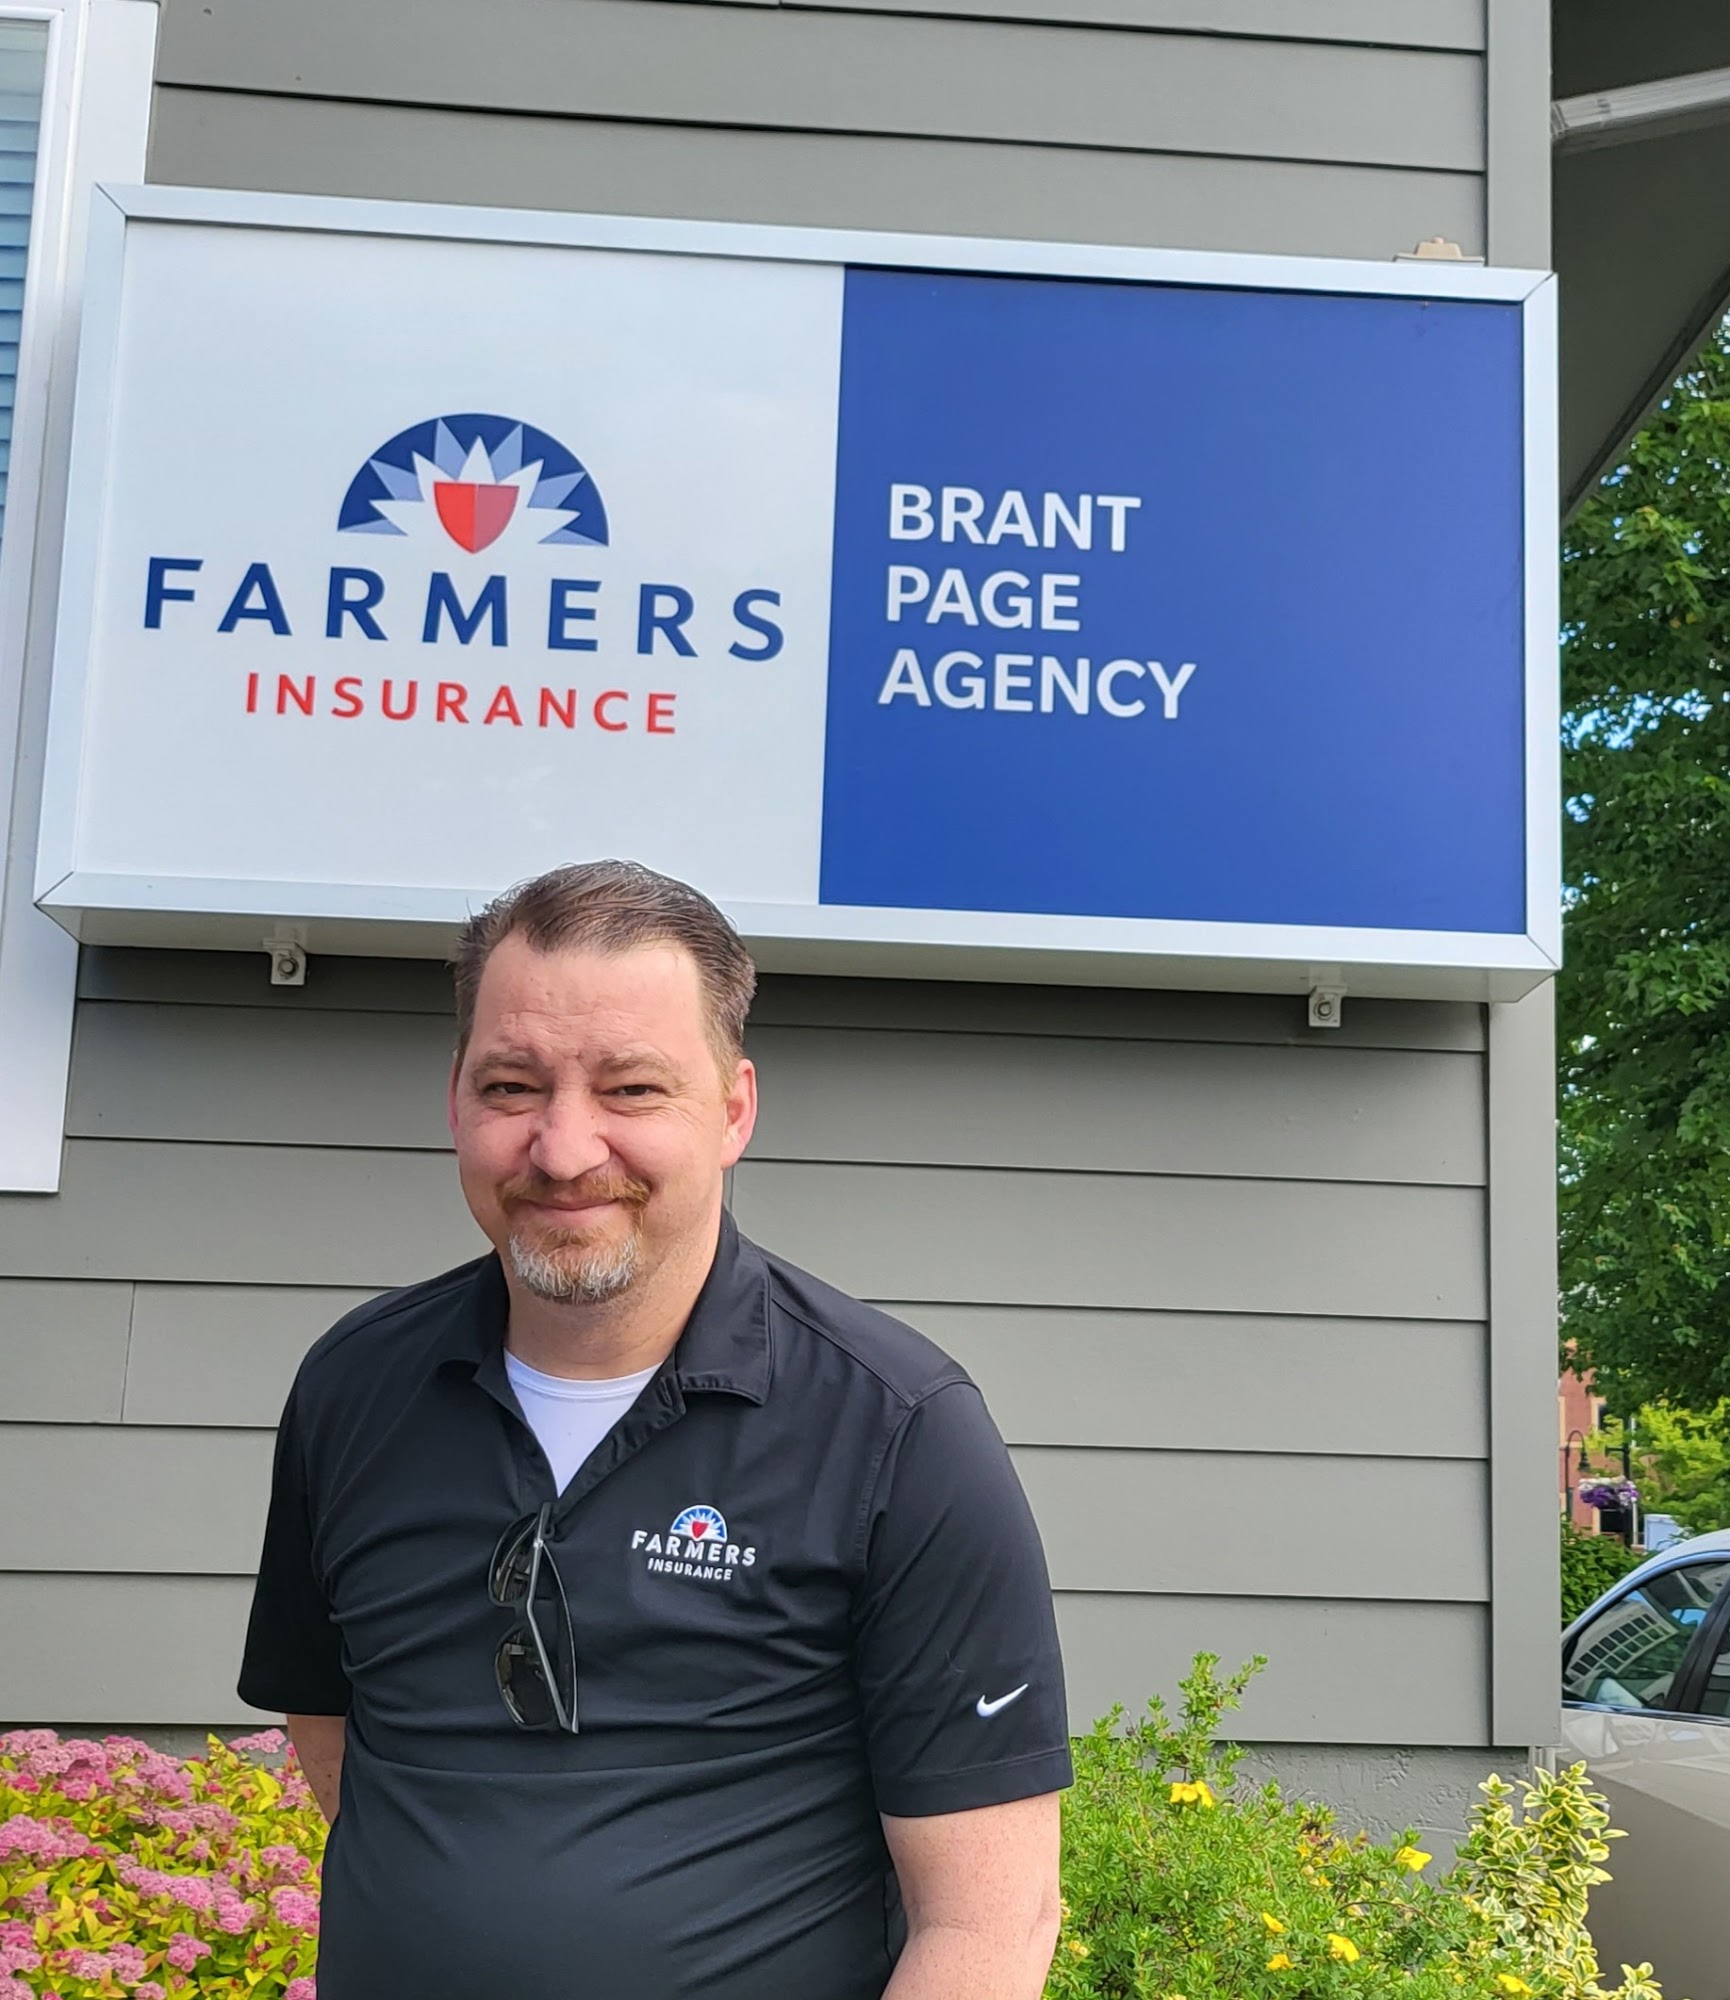 Farmers Insurance: C. Brant Page